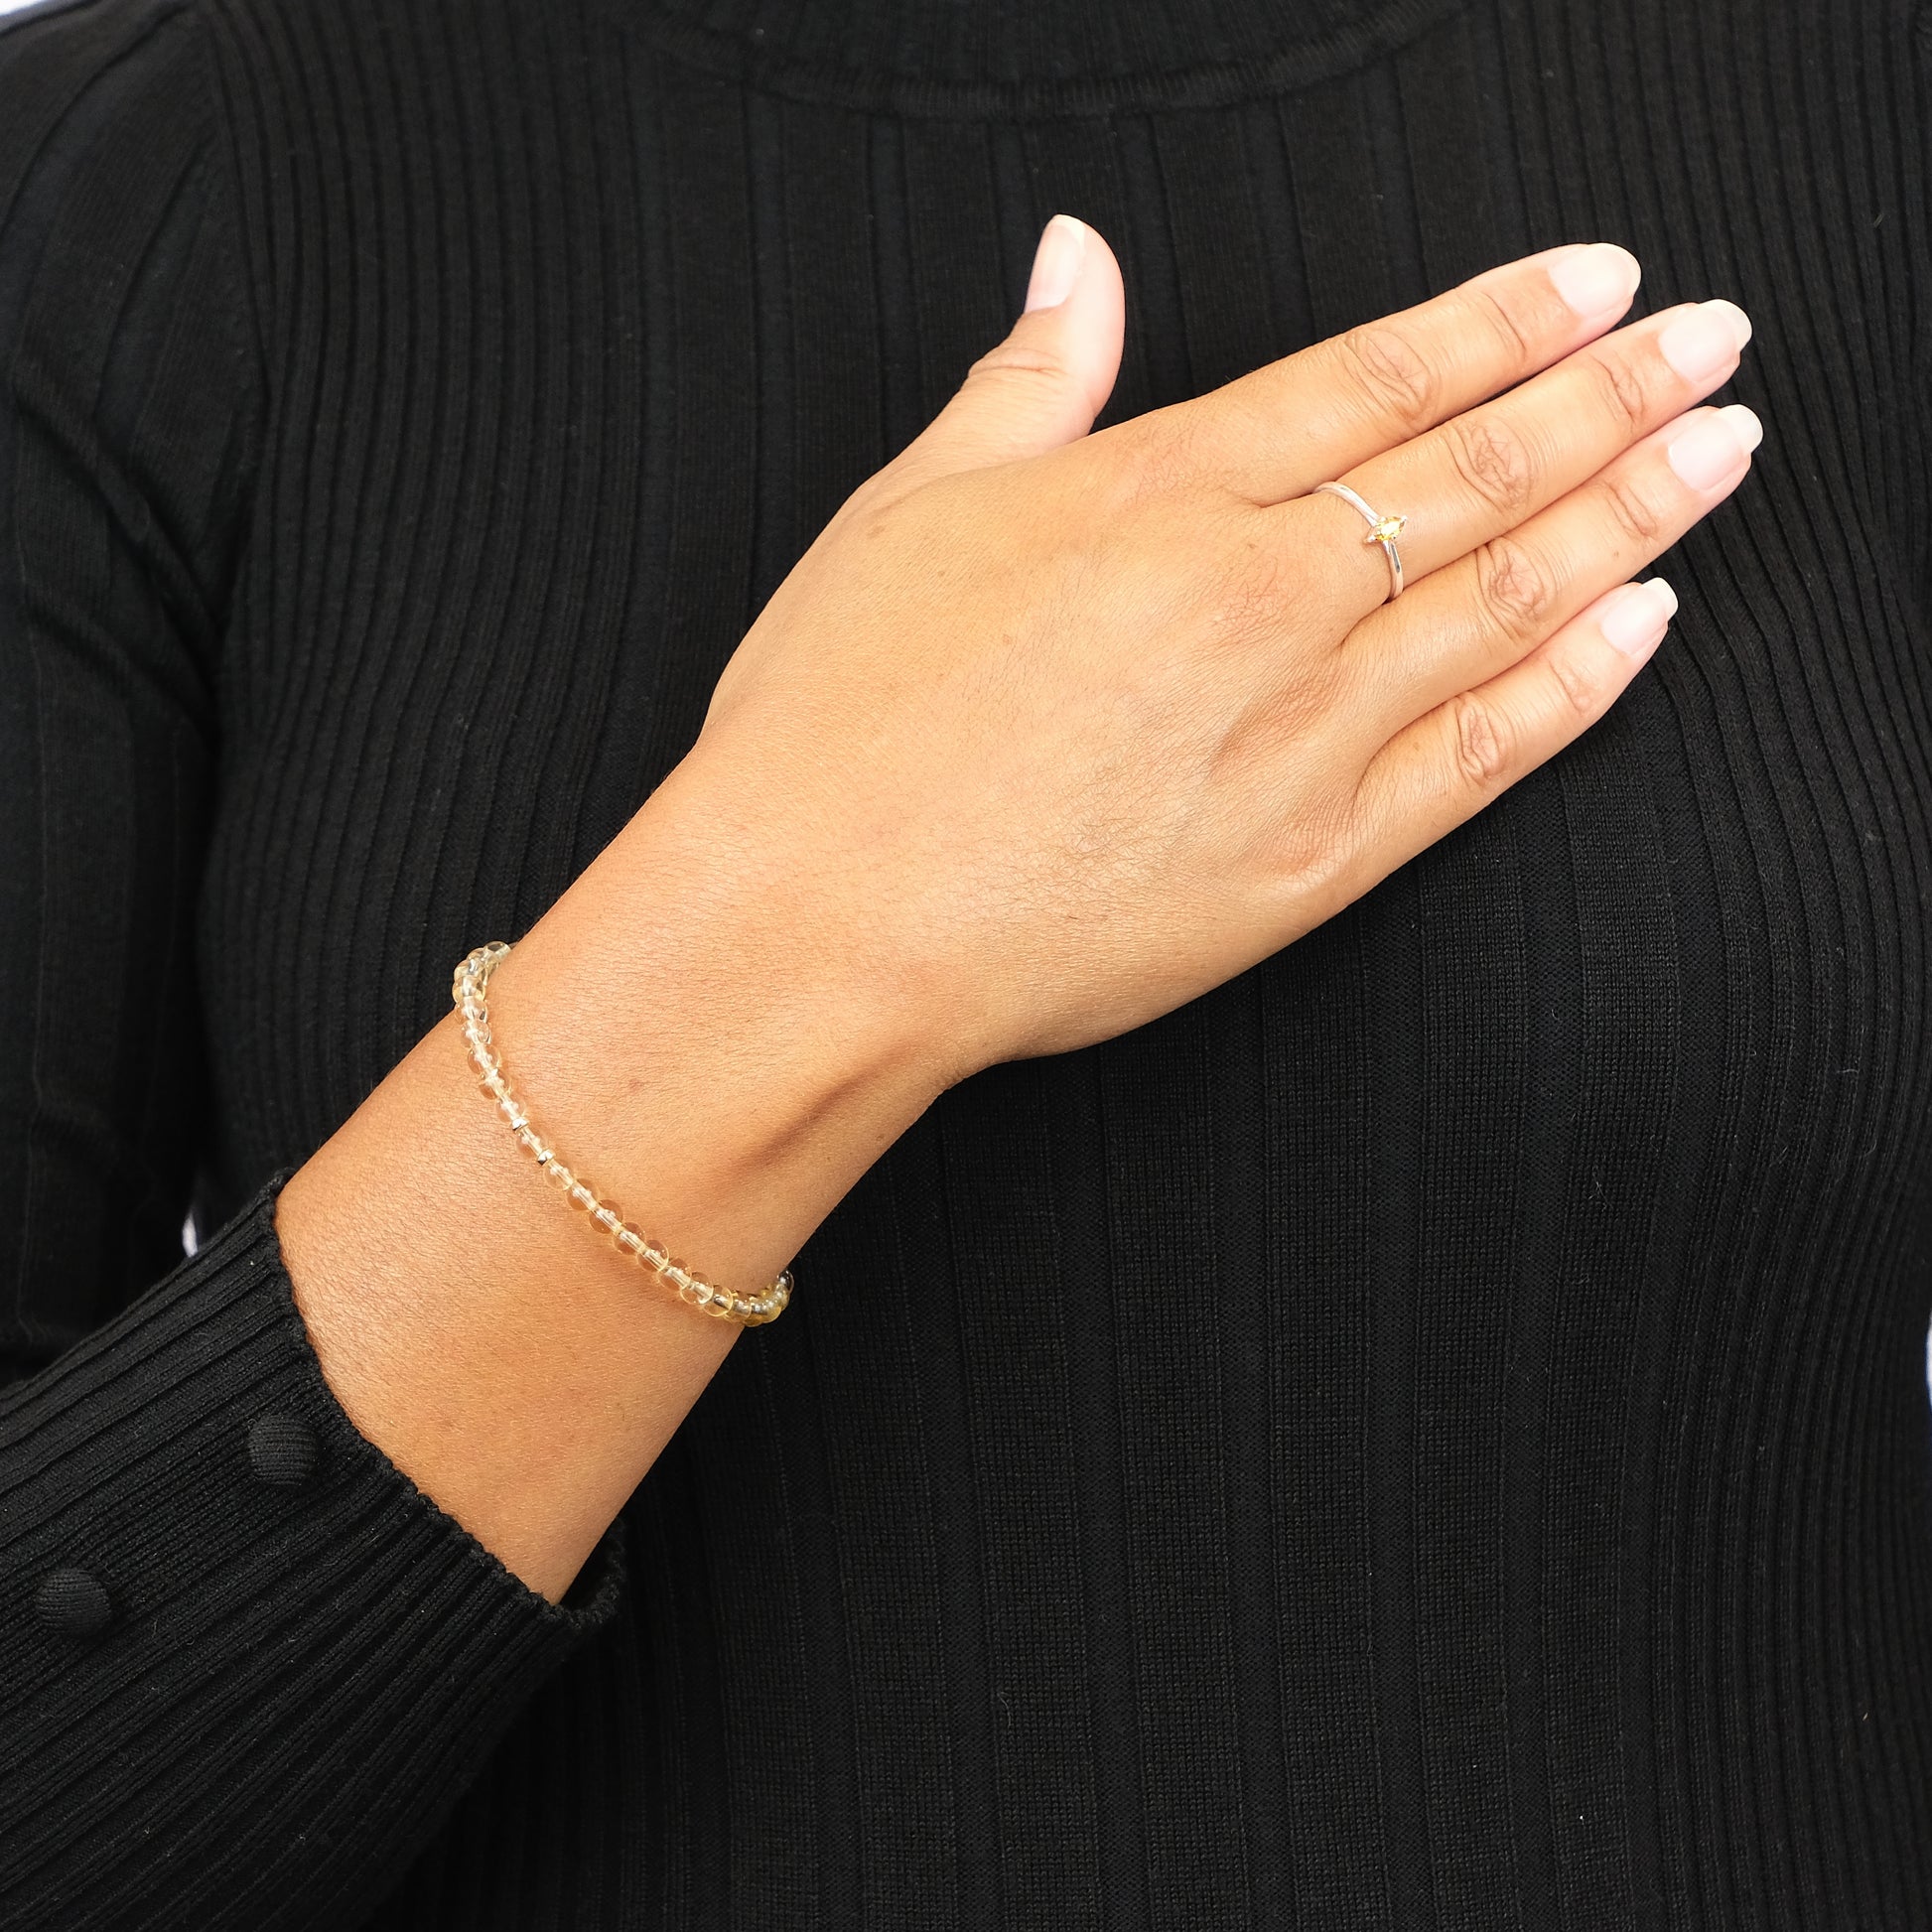 A model wearing 4mm Citrine energy gemstone bracelet with gold accessories